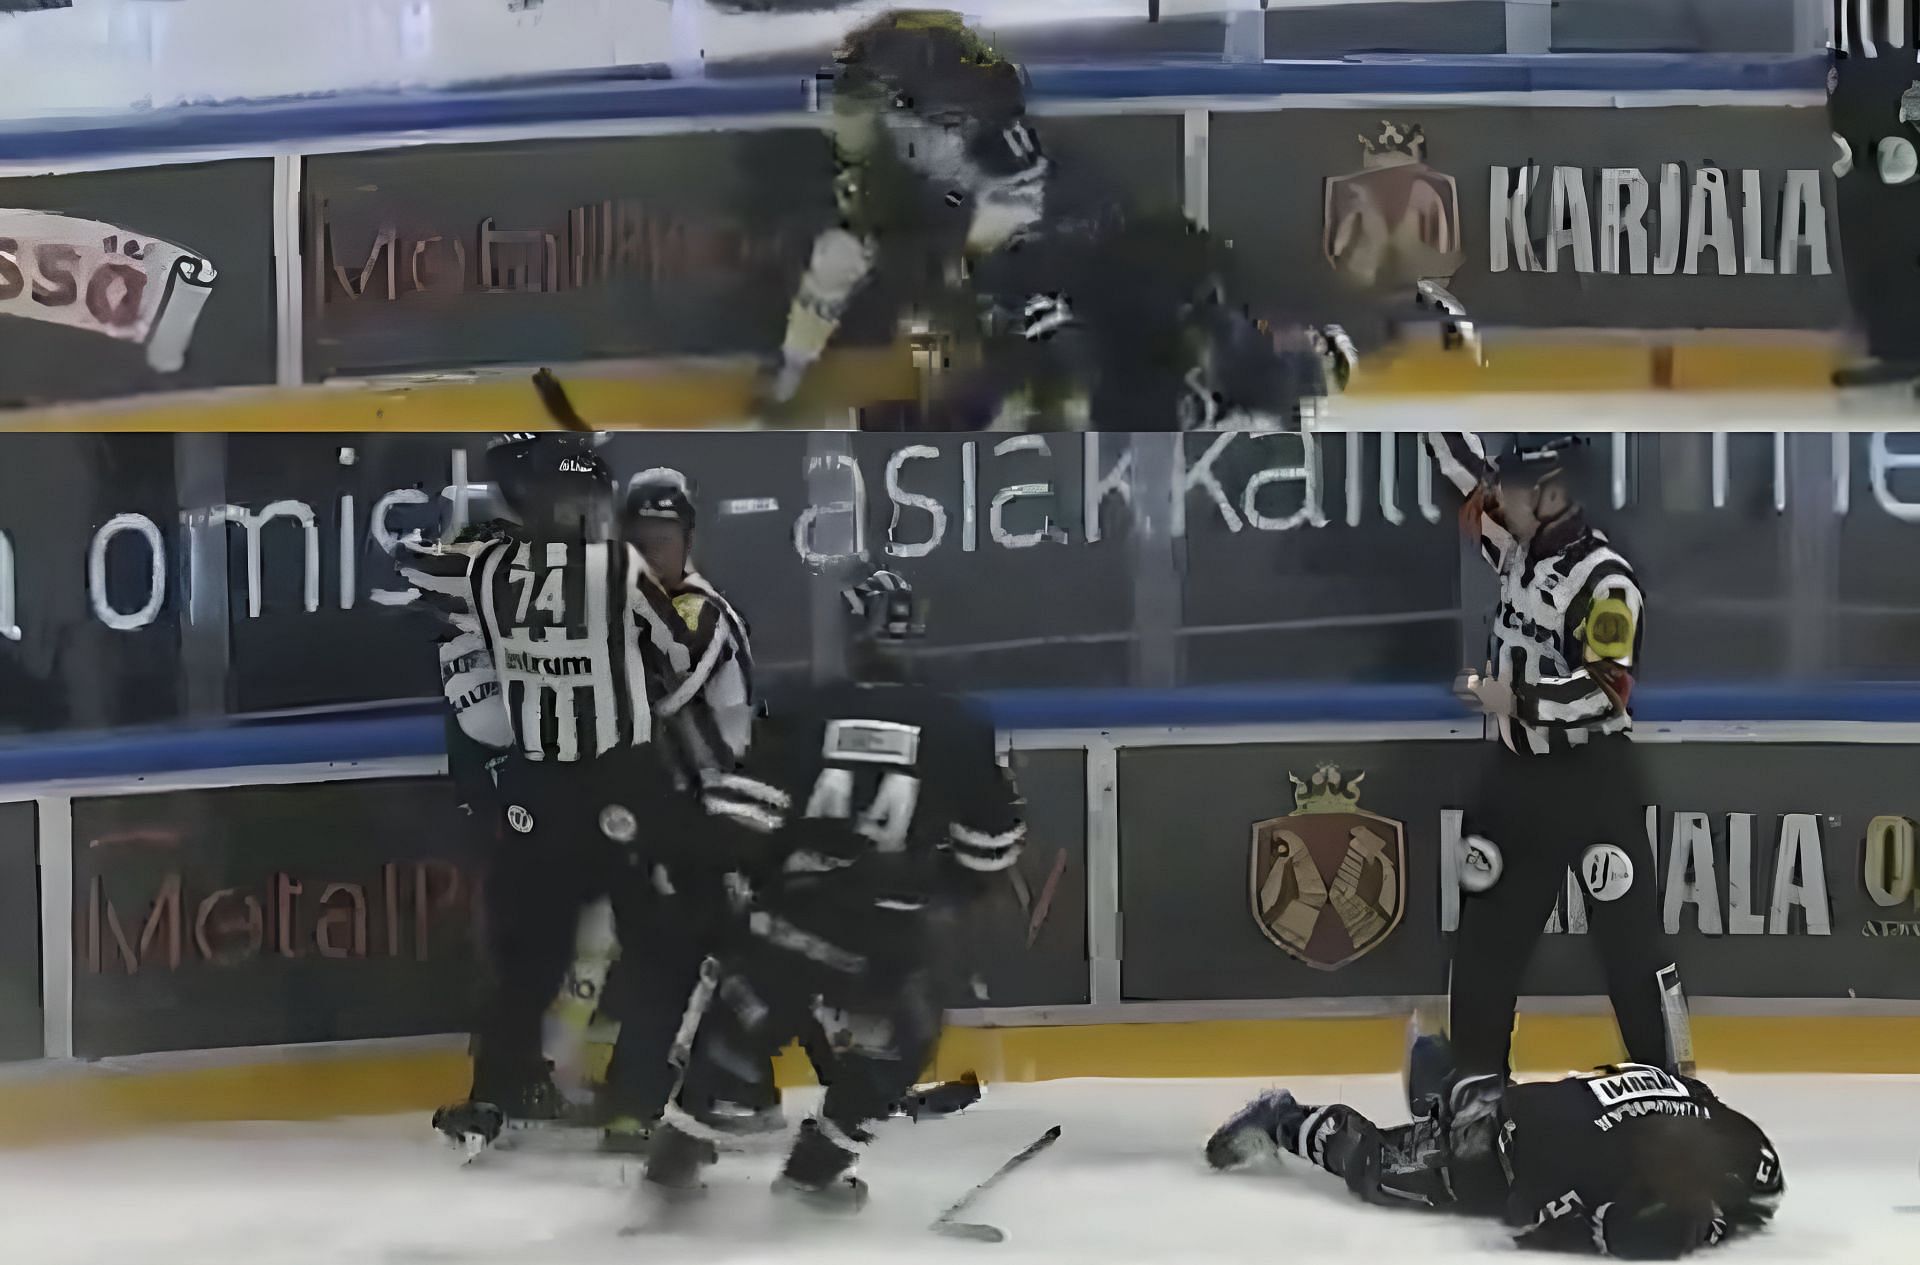 WATCH: Nick Ritchie ejected after delivering non-stop blows to an already knocked down Markus Nurmi in Finnish hockey league